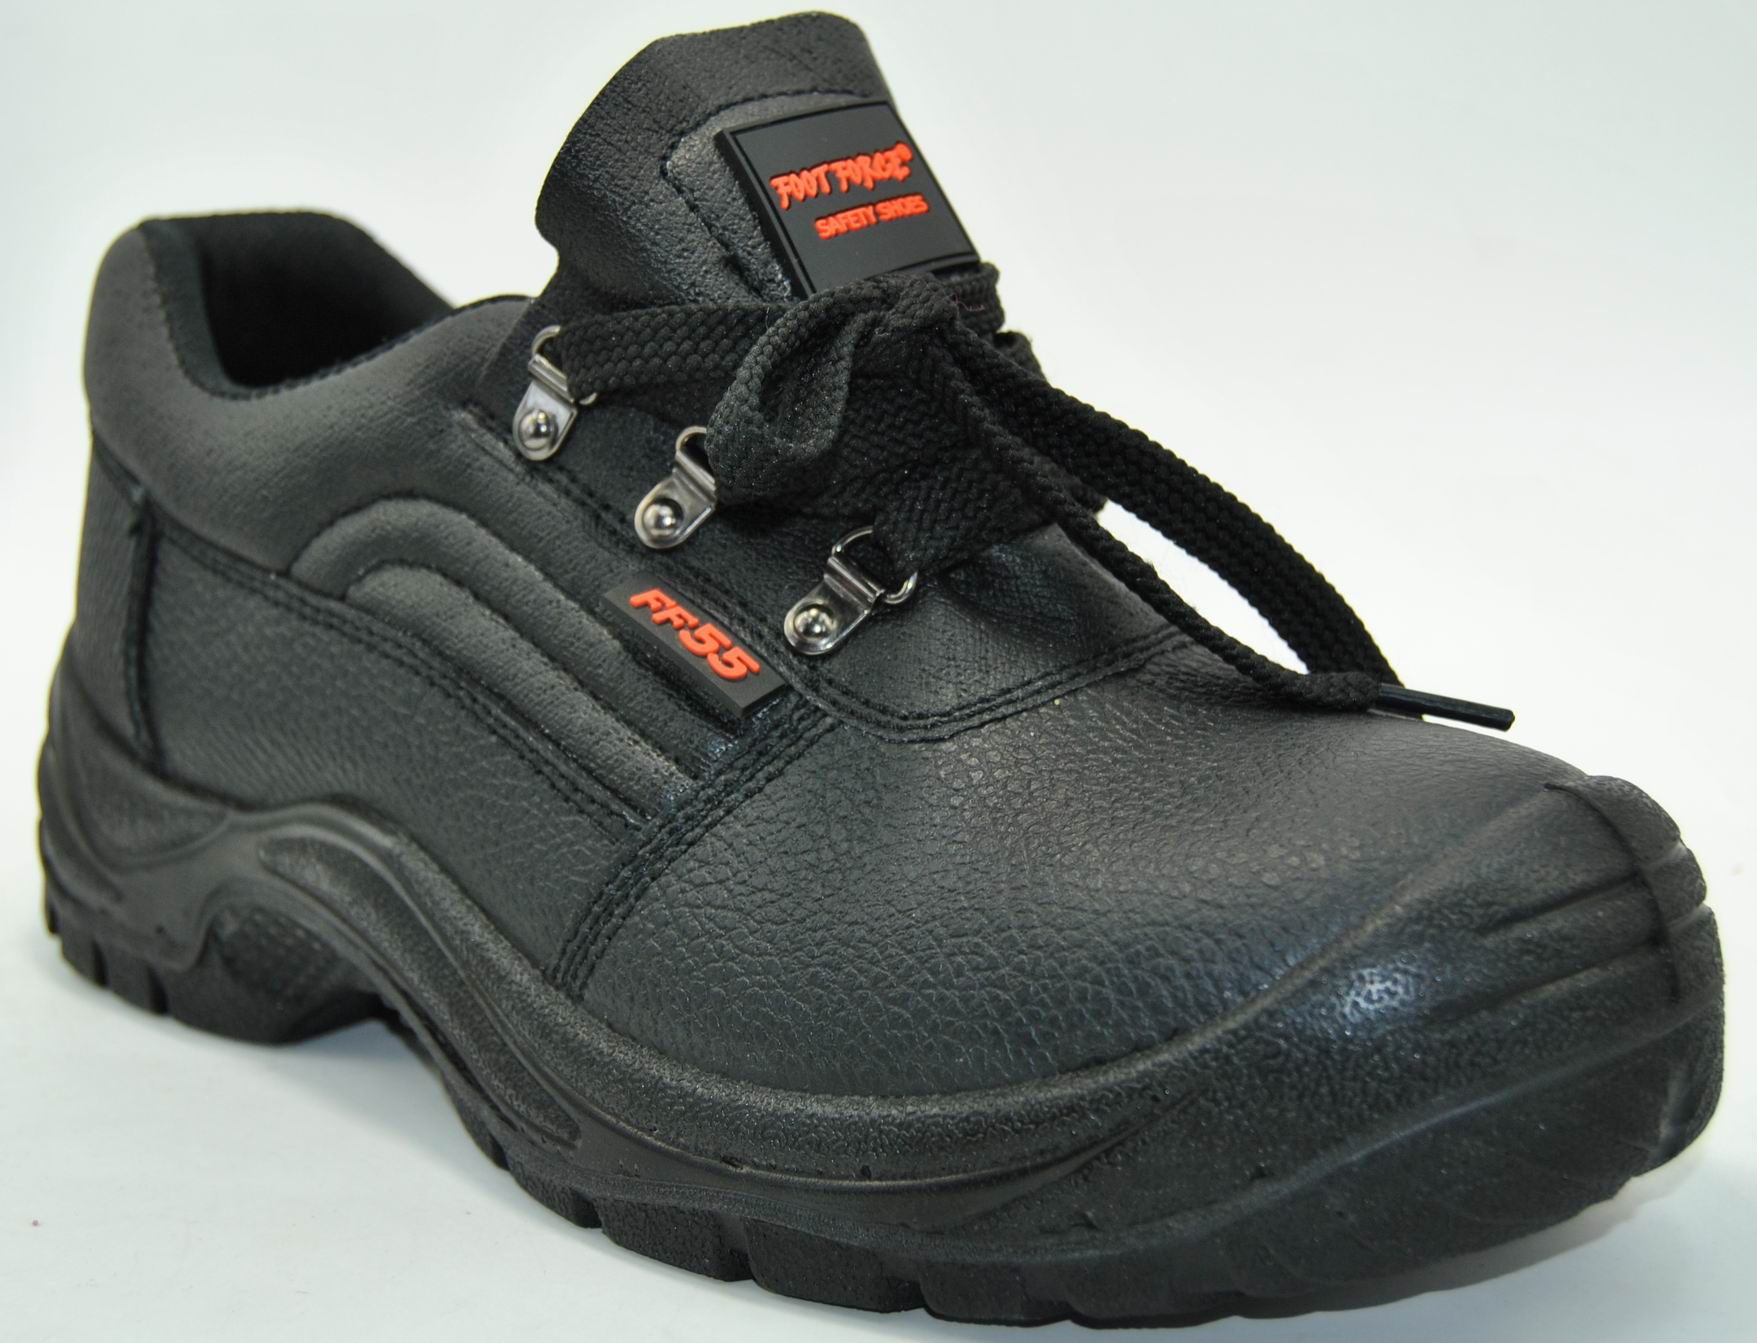 FOOT FORCE SAFETY SHOE